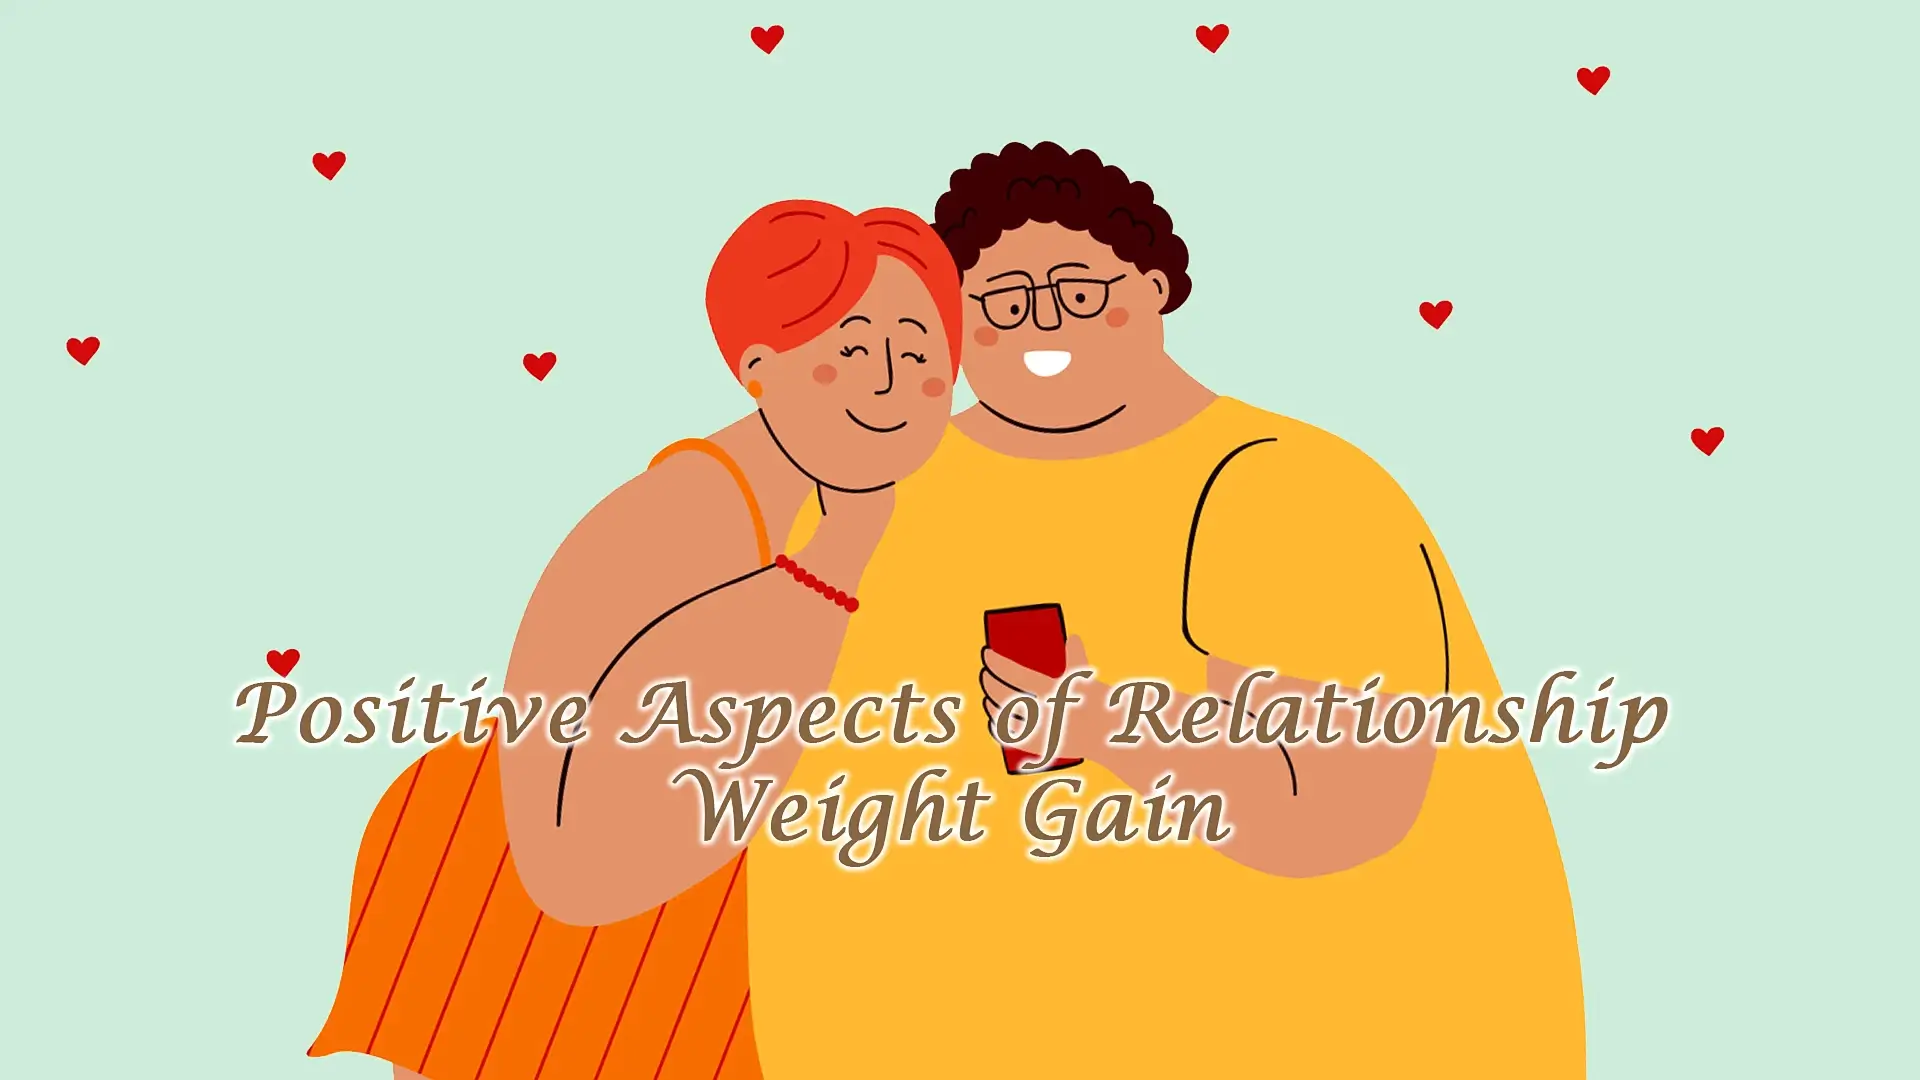 Positive Aspects of Relationship Weight Gain